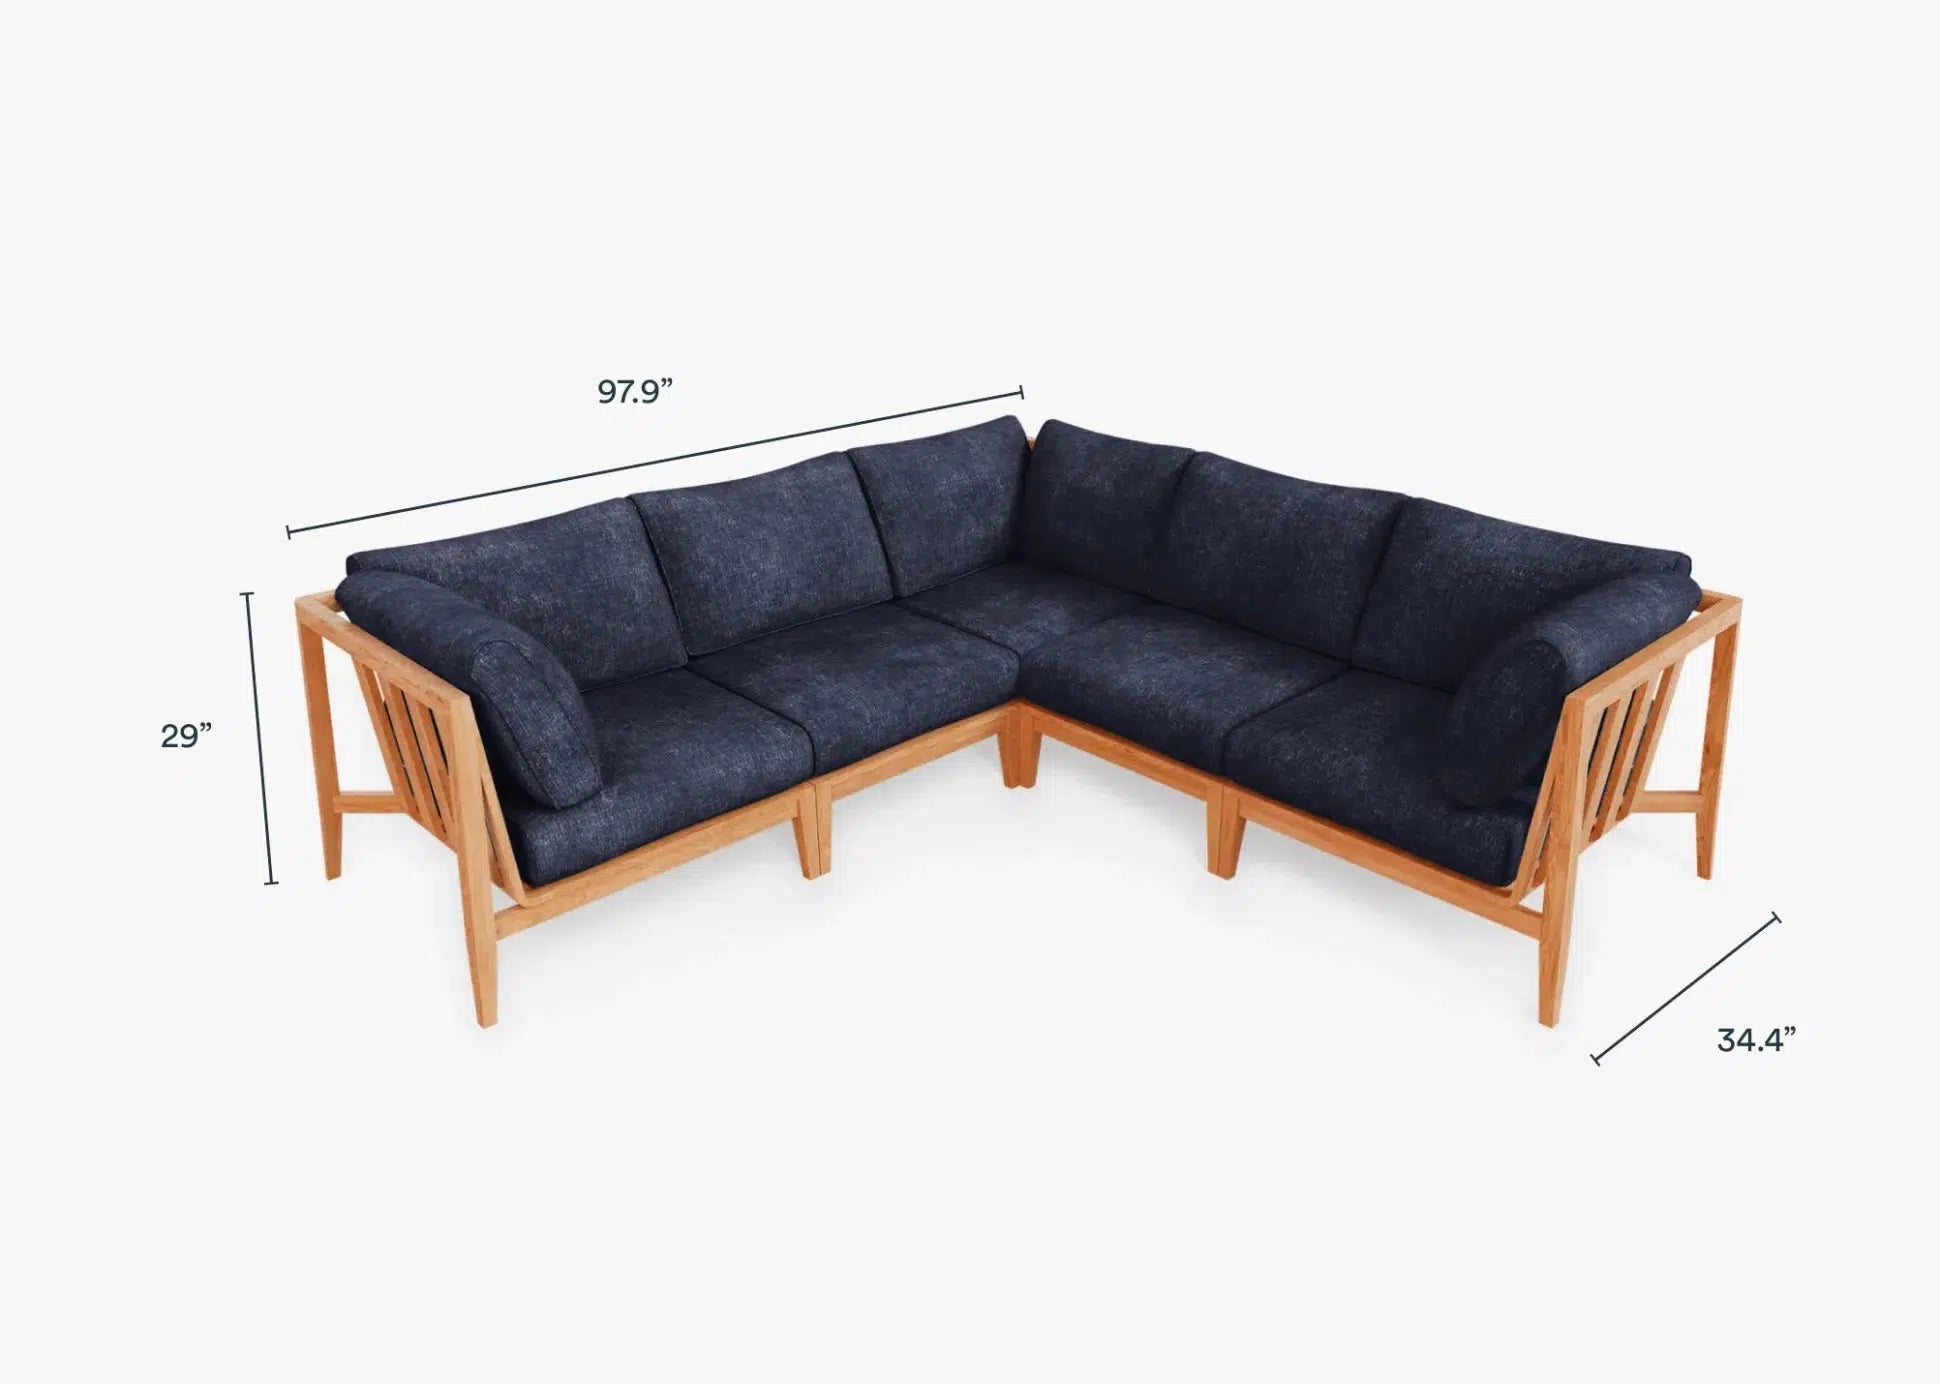 Live Outer 98" x 98" Teak Outdoor Corner Sectional 5-Seat With Deep Sea Navy Cushion